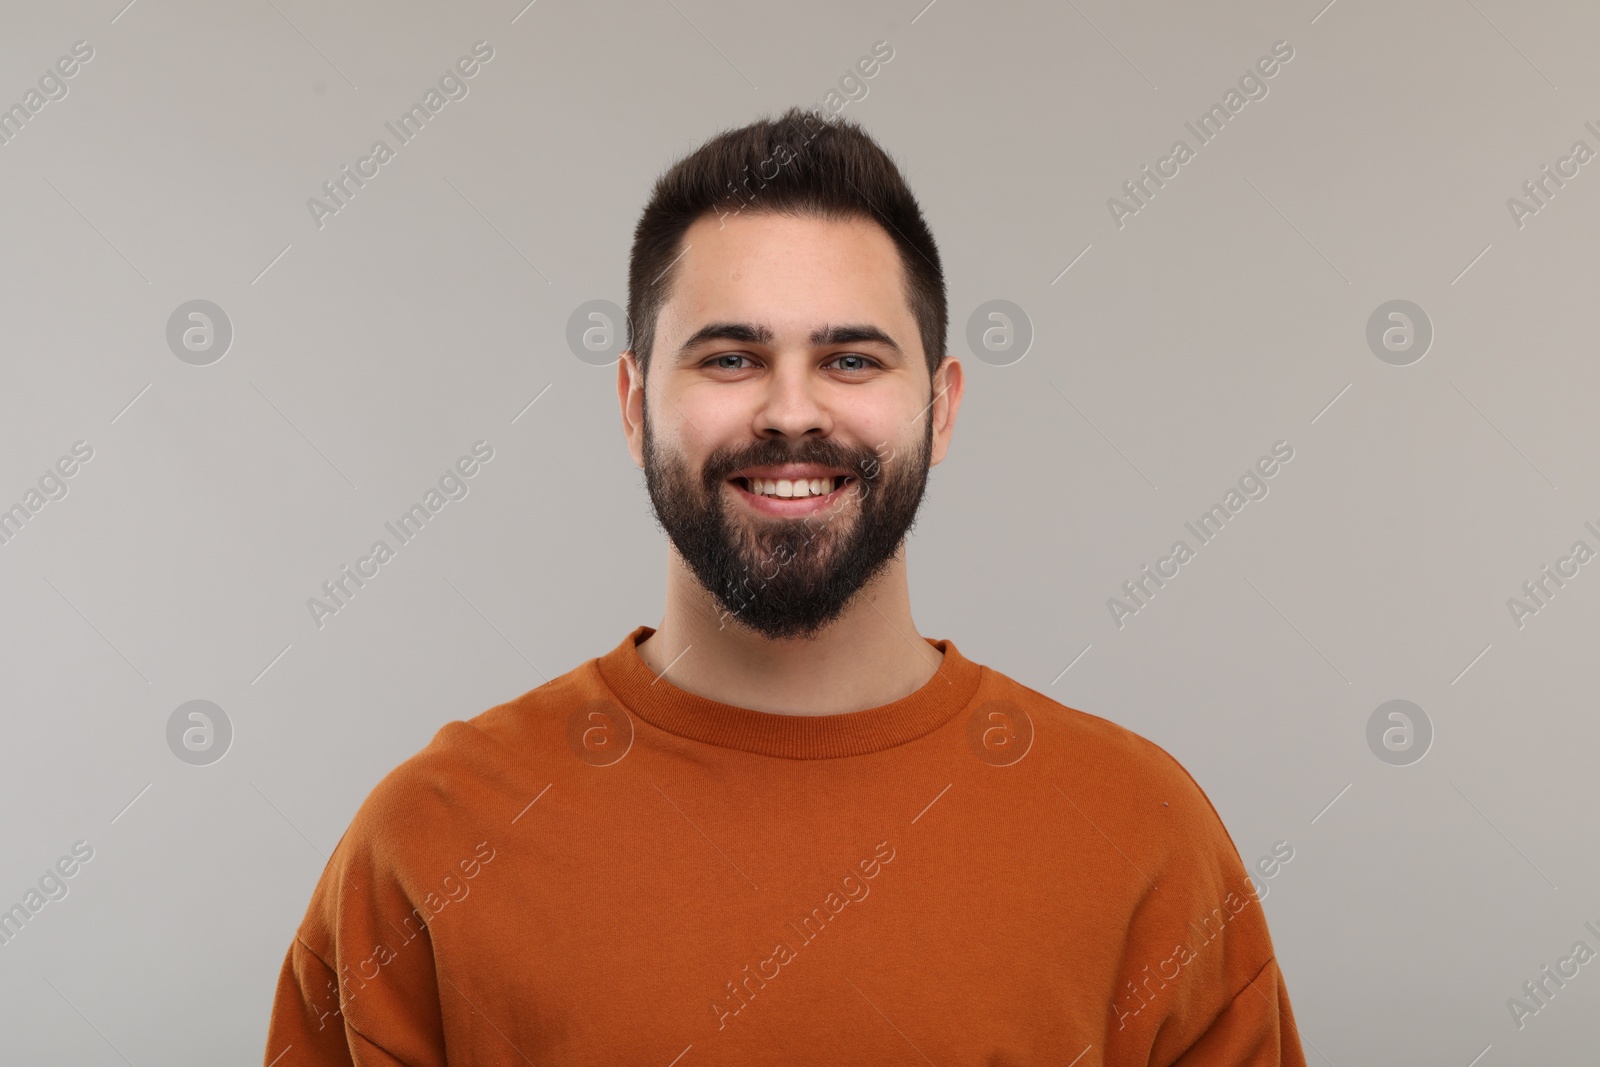 Photo of Man with clean teeth smiling on gray background